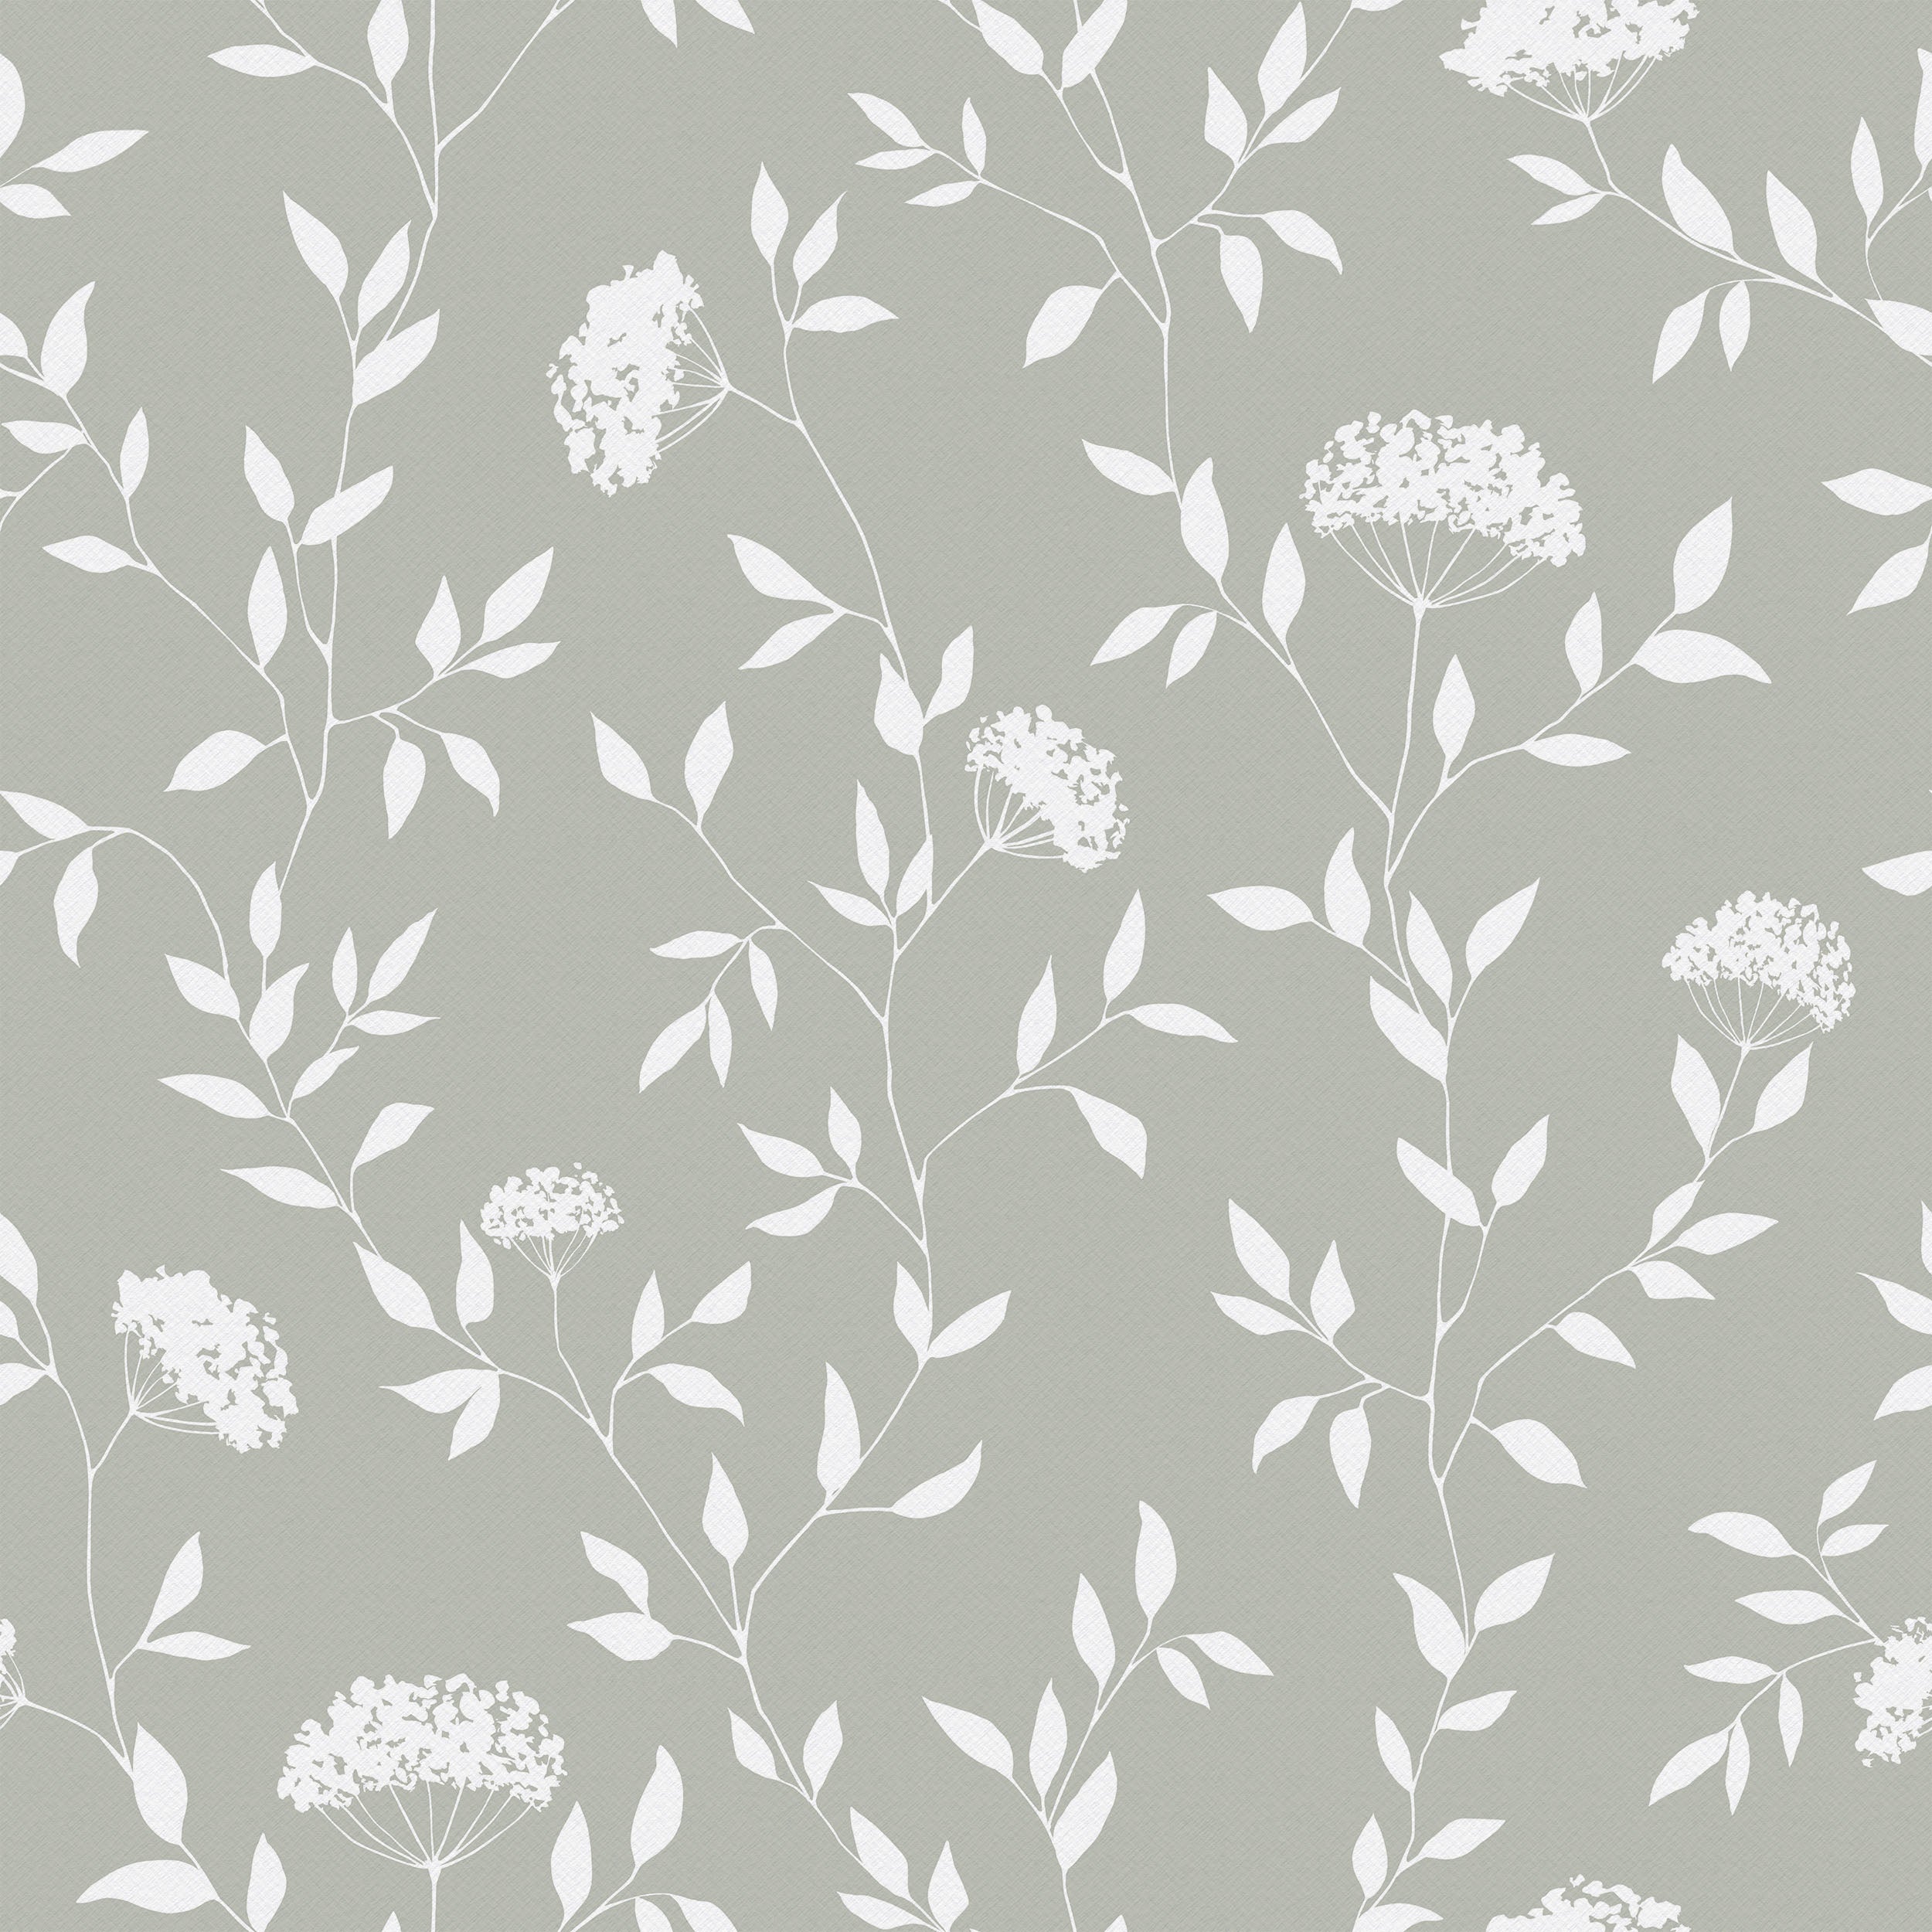 A close-up view of the Botanical Elegance Wallpaper-Olive, highlighting its design details. The wallpaper has a muted olive background with a matte finish, overlaid with white botanical illustrations. The design features slender branches interspersed with sparse leaves and occasional clusters of small, intricate flowers. This wallpaper adds a touch of nature-inspired sophistication to any room.